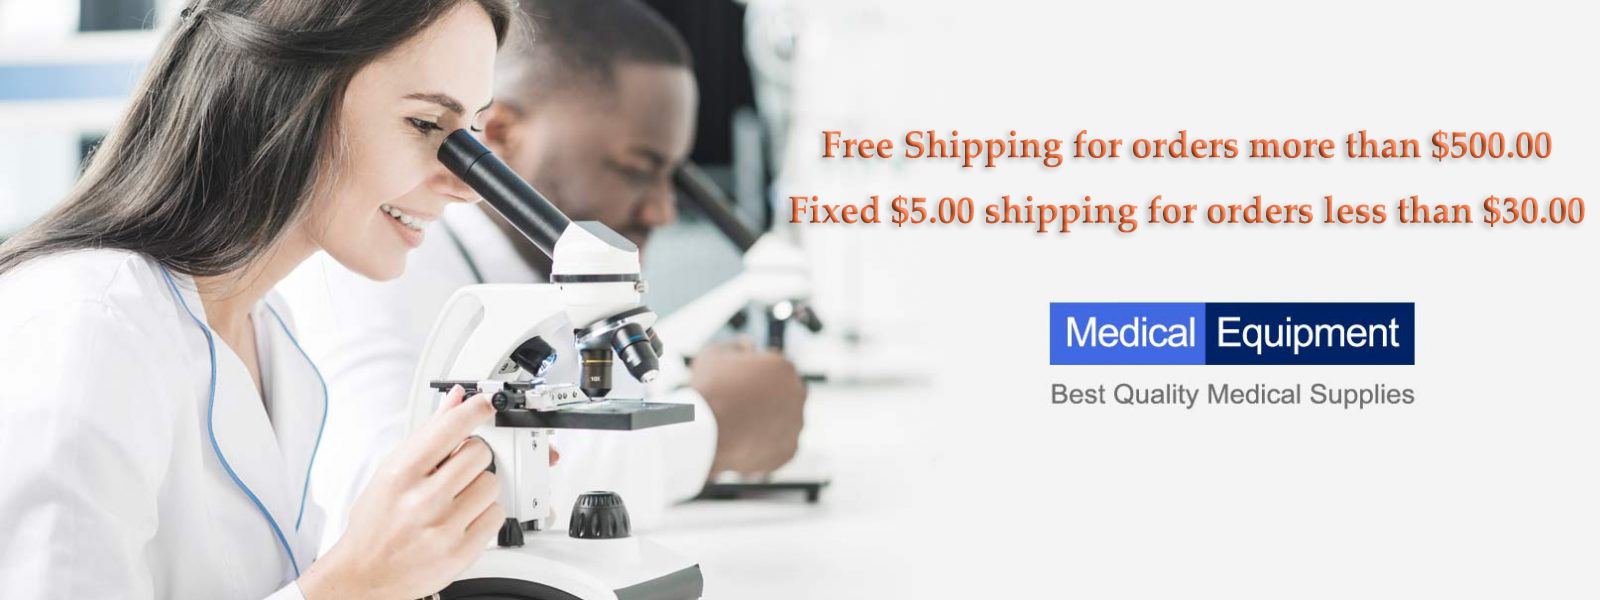 Best Quality Medical Supplies Free Shipping